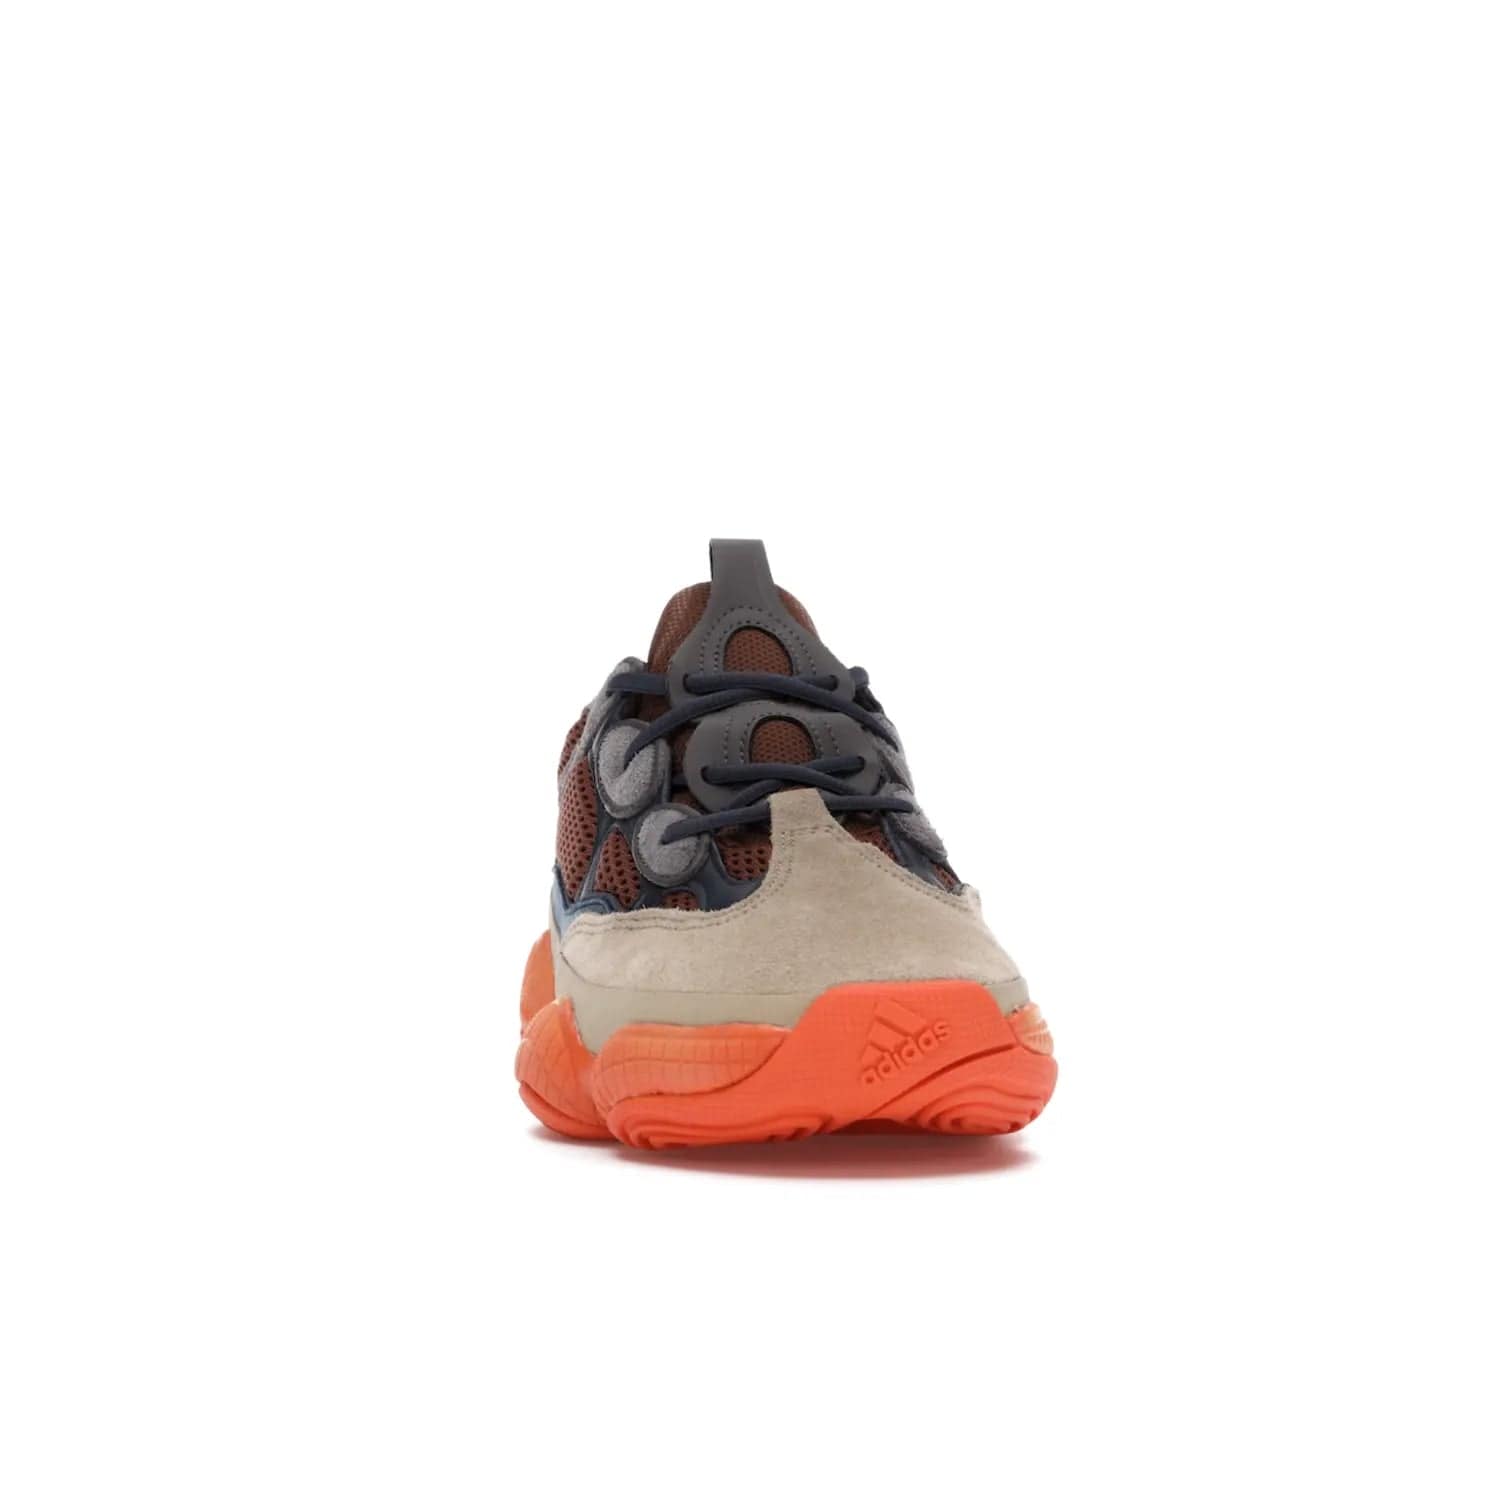 adidas Yeezy 500 Enflame - Image 9 - Only at www.BallersClubKickz.com - Step into style with the adidas Yeezy 500 Enflame. Mix of mesh, leather, and suede layered together to create tonal-brown, dark blue, & orange. Orange AdiPRENE sole provides superior cushioning & comfort. Get yours and experience maximum style.